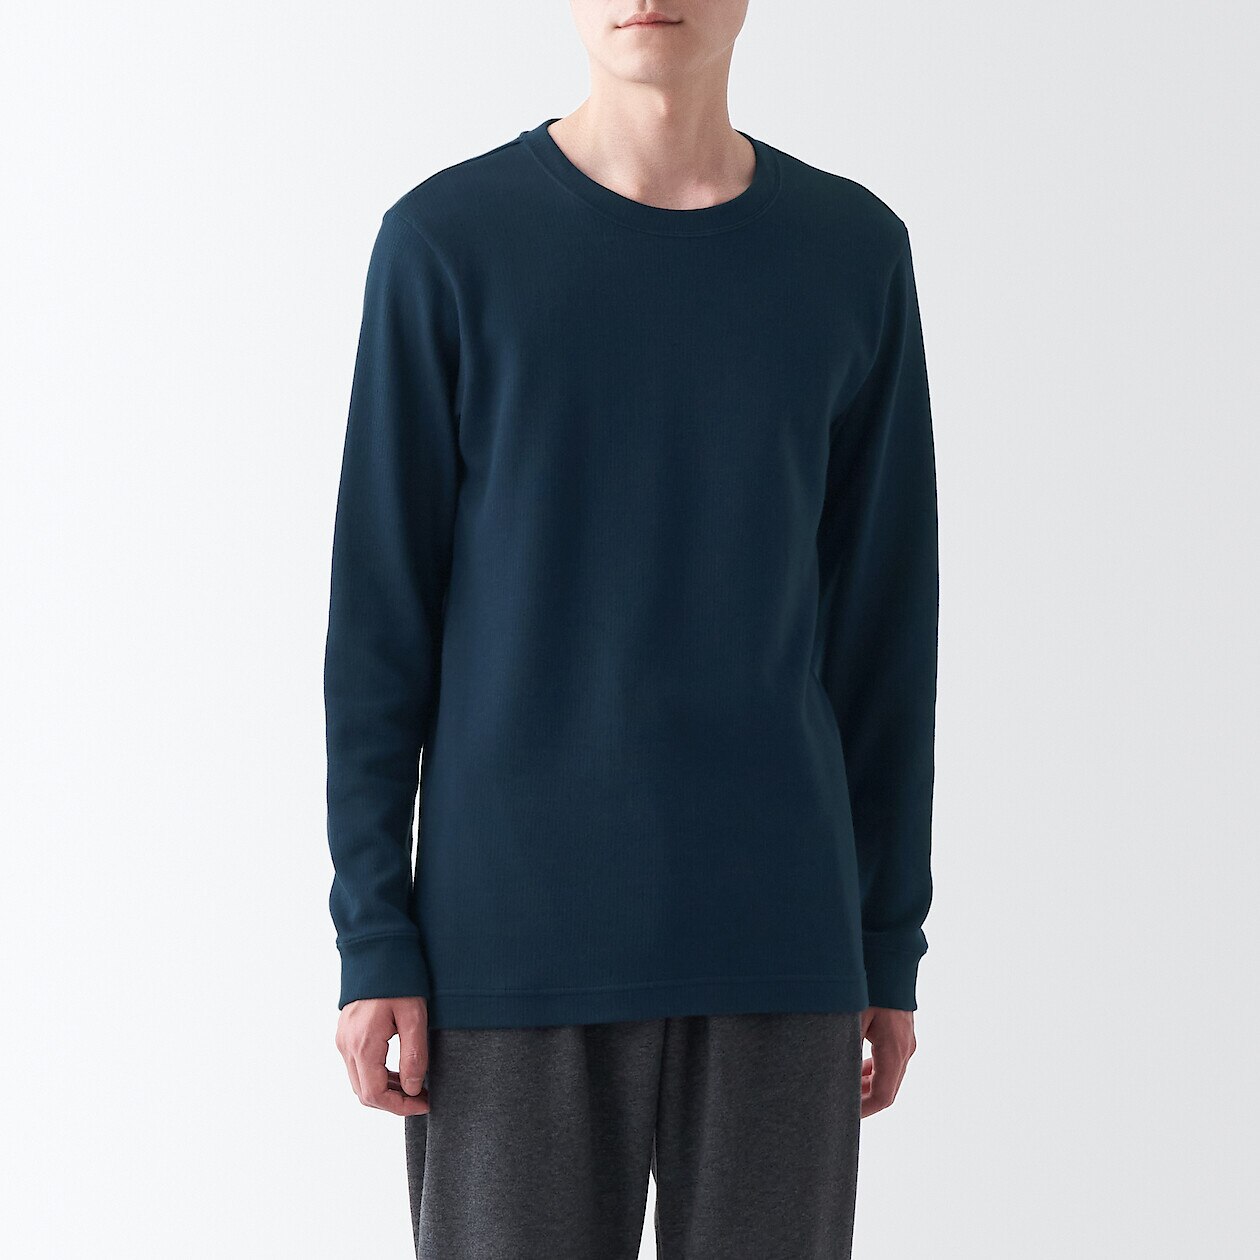 Men's Cotton and Wool Crew Neck Long Sleeve T-shirt